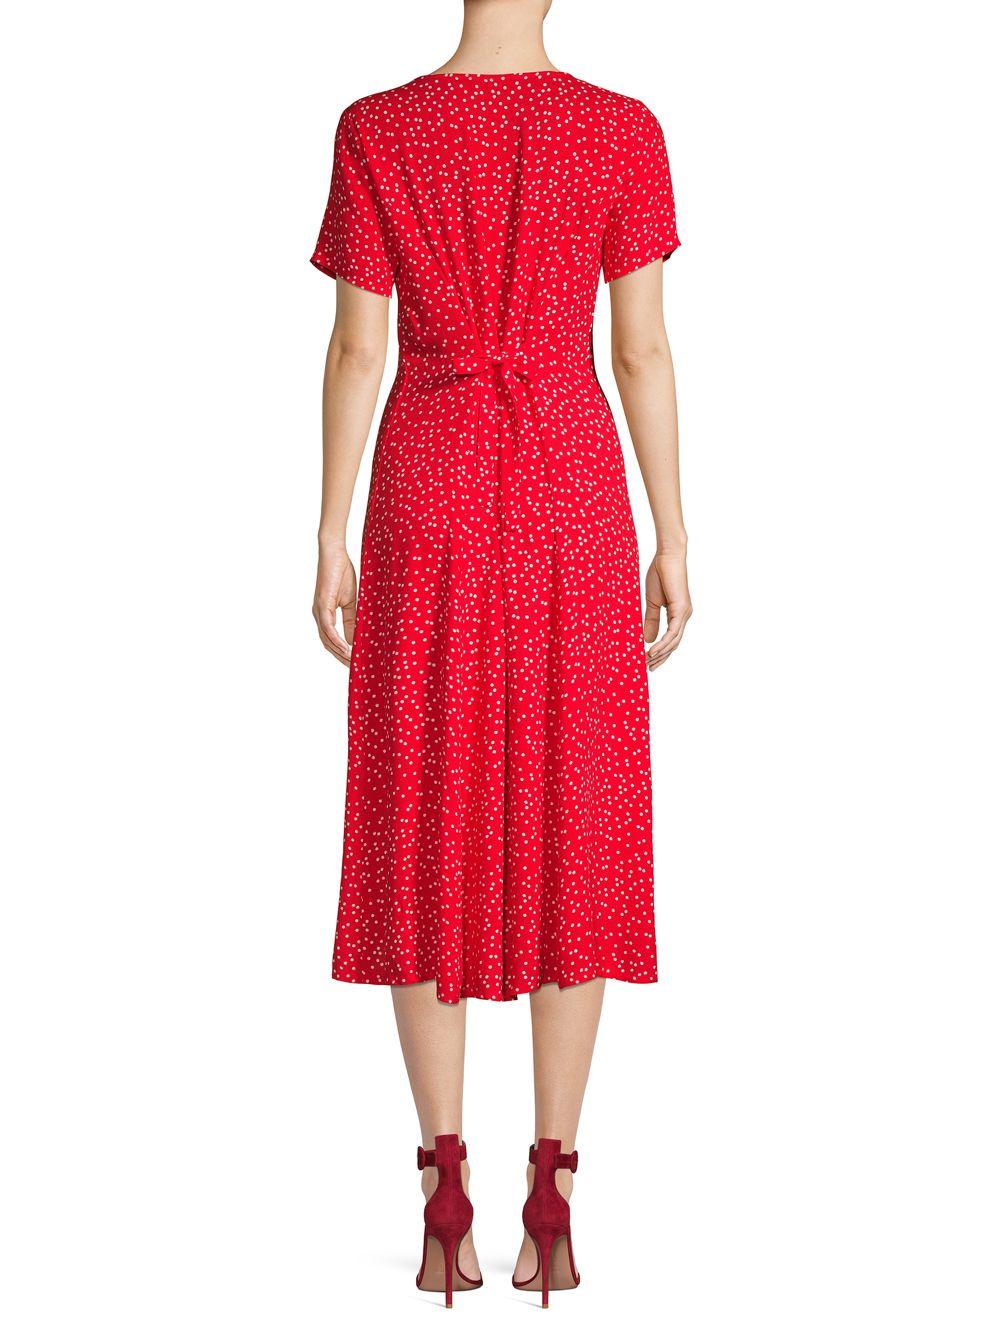 Saks Fifth Avenue Synthetic Ditsy Print Midi Dress in Red - Lyst